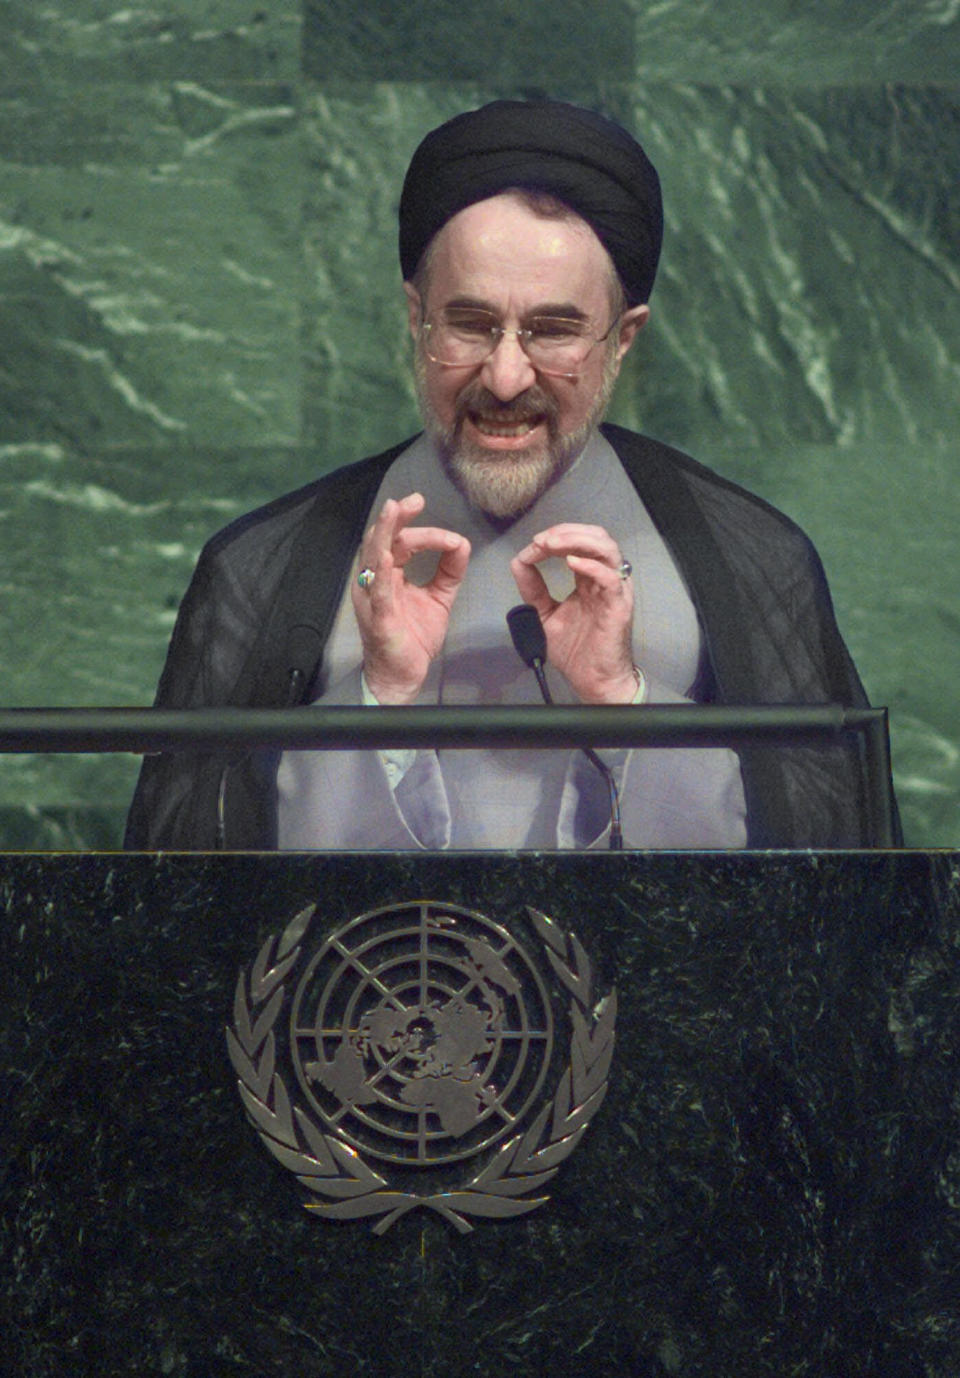 FILE - In this Sept. 21, 1998, file photo, Iranian President Mohammad Khatami gestures during his address to the opening session of the 53rd General Assembly Monday, at the United Nations. The relatively moderate Mohammad Khatami, president of Iran from 1997 to 2005, addressed the General Assembly several times, proposing a “Dialogue Among Civilizations” that the U.N. adopted in 2001. (AP Photo/Charles Krupa, File)